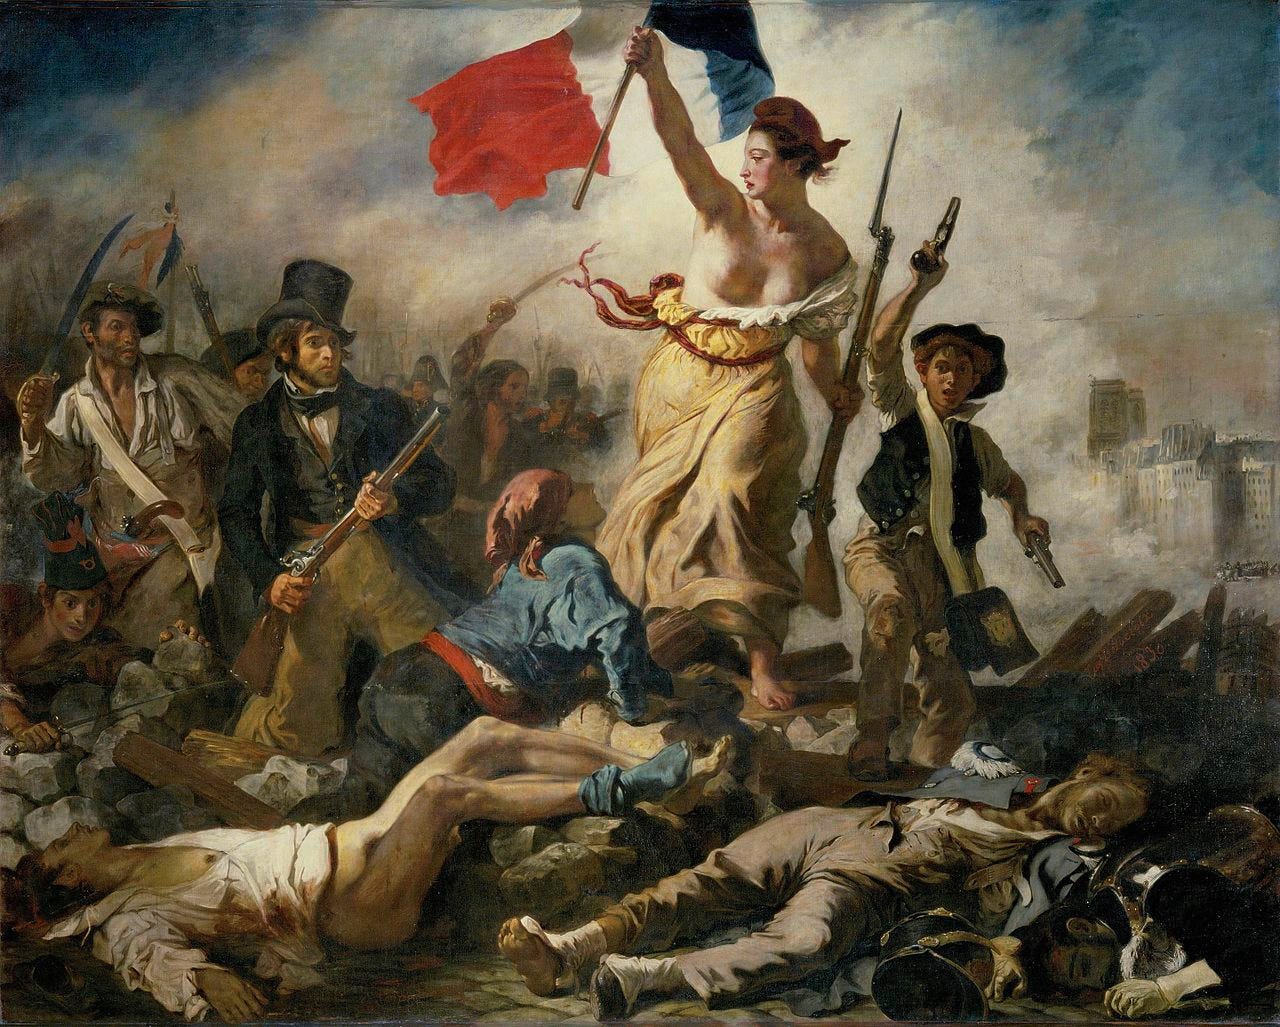 The French Revolution | Revolution and counter-revolution before 1900 |  History & Theory